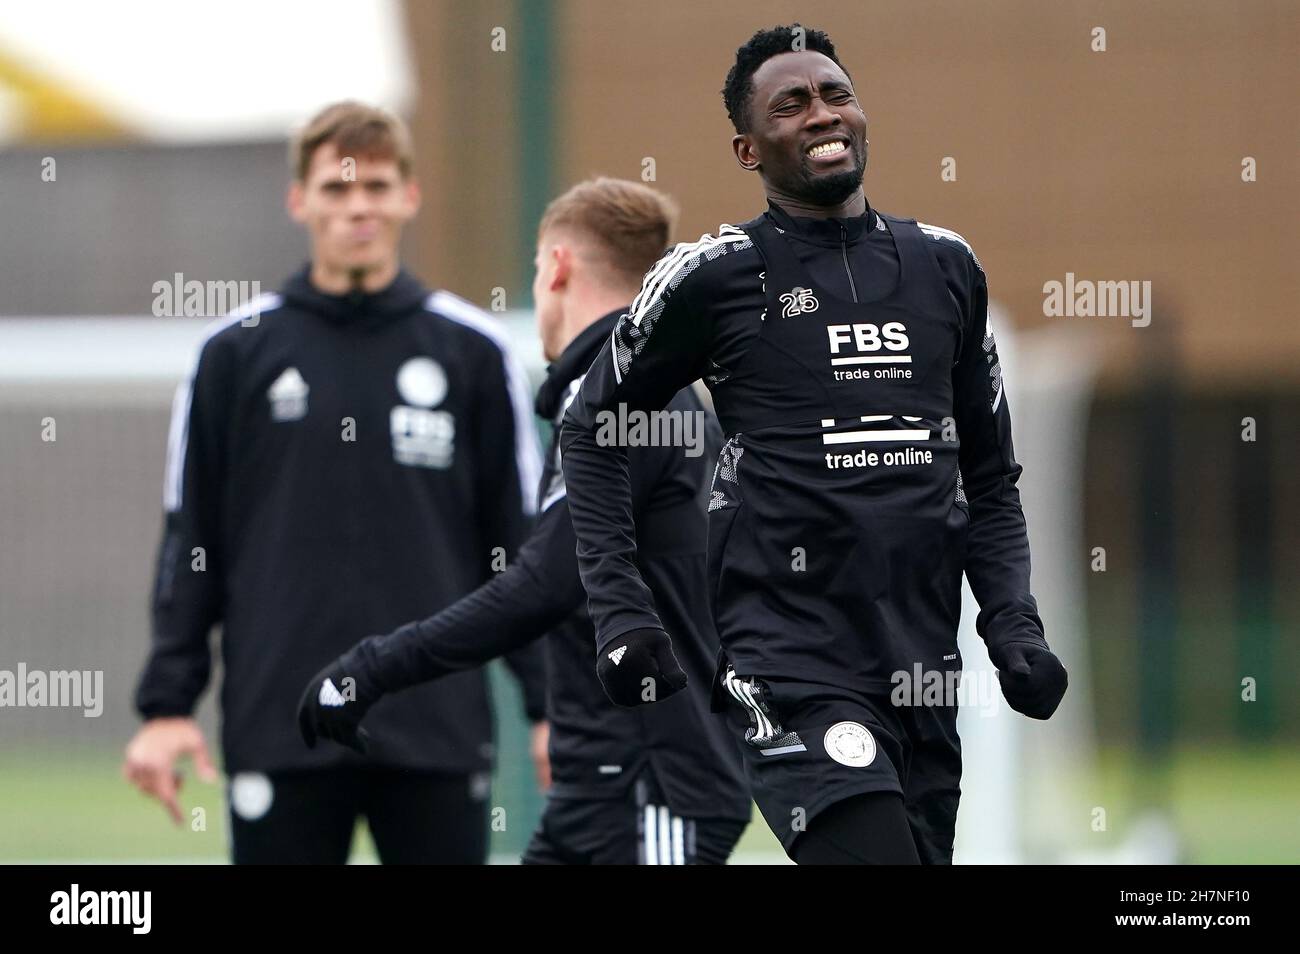 Leicester City's Wilfred Ndidi (right) appears in discomfort during a training session at Seagrave Training Complex, Leicester. Picture date: Wednesday November 24, 2021. Stock Photo